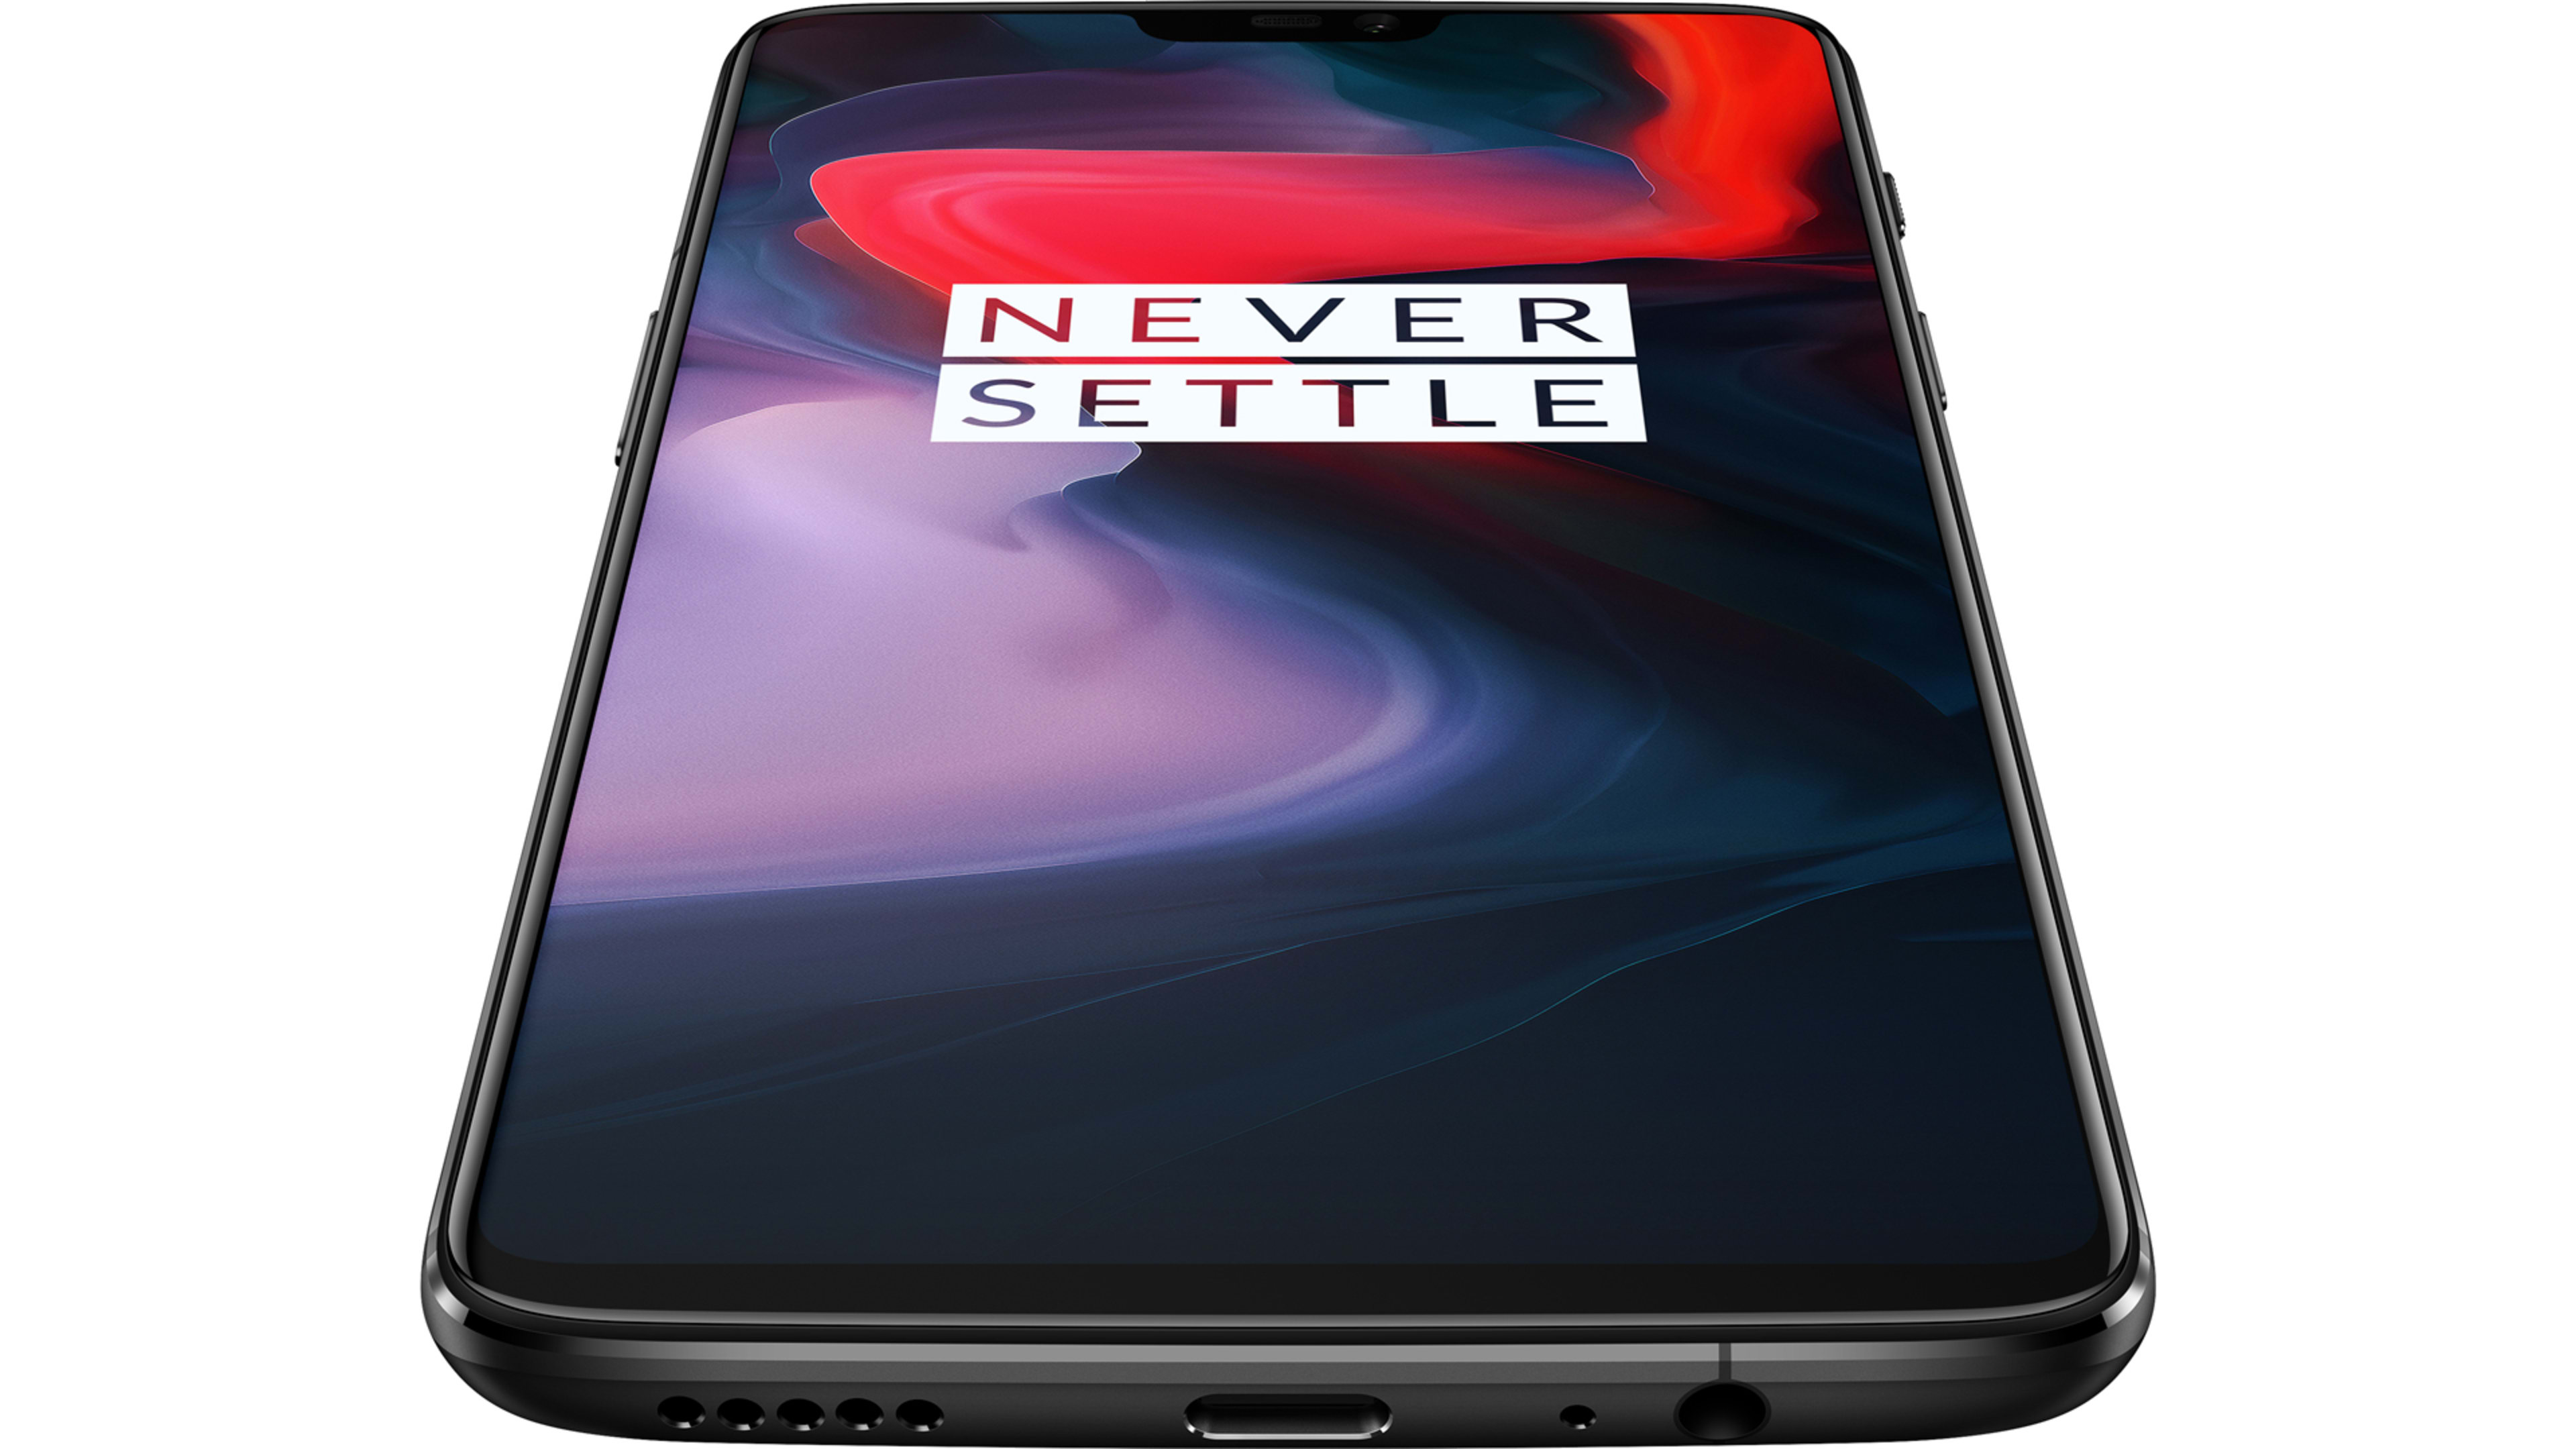 OnePlus just joined the notch brigade with its new smartphone